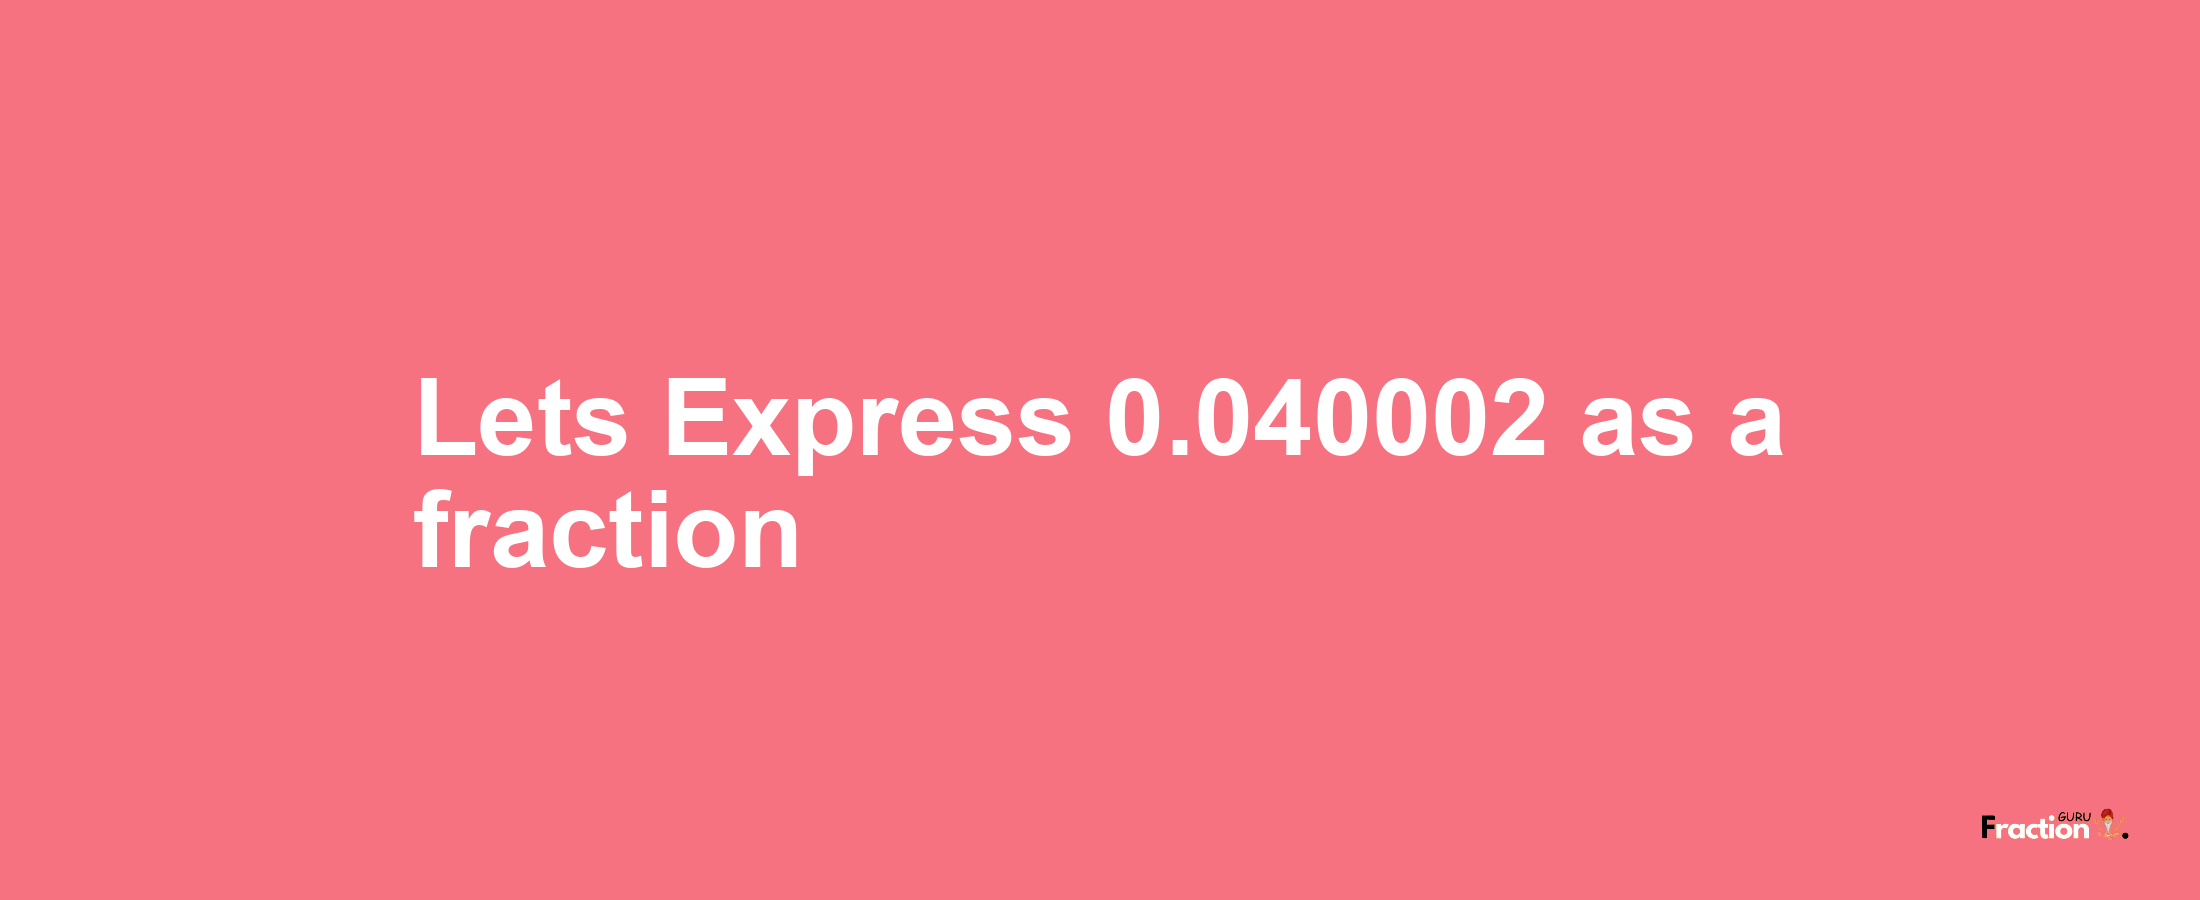 Lets Express 0.040002 as afraction